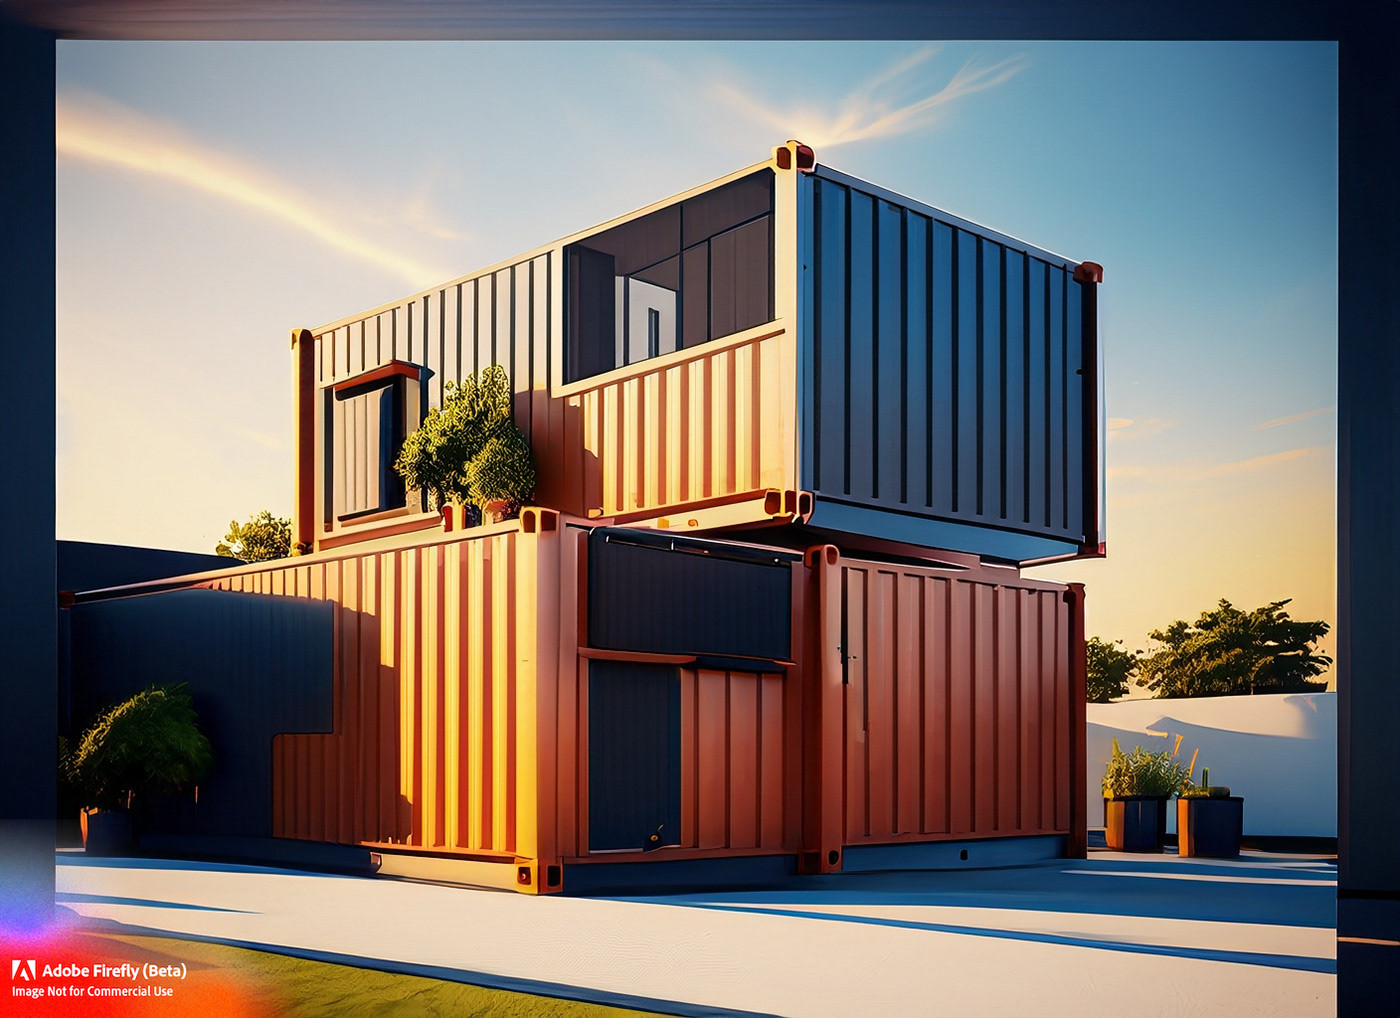 adobe firefly ai architecture house Mid Century modern modernism reclaimed RECYCLED repurposed Shipping container home